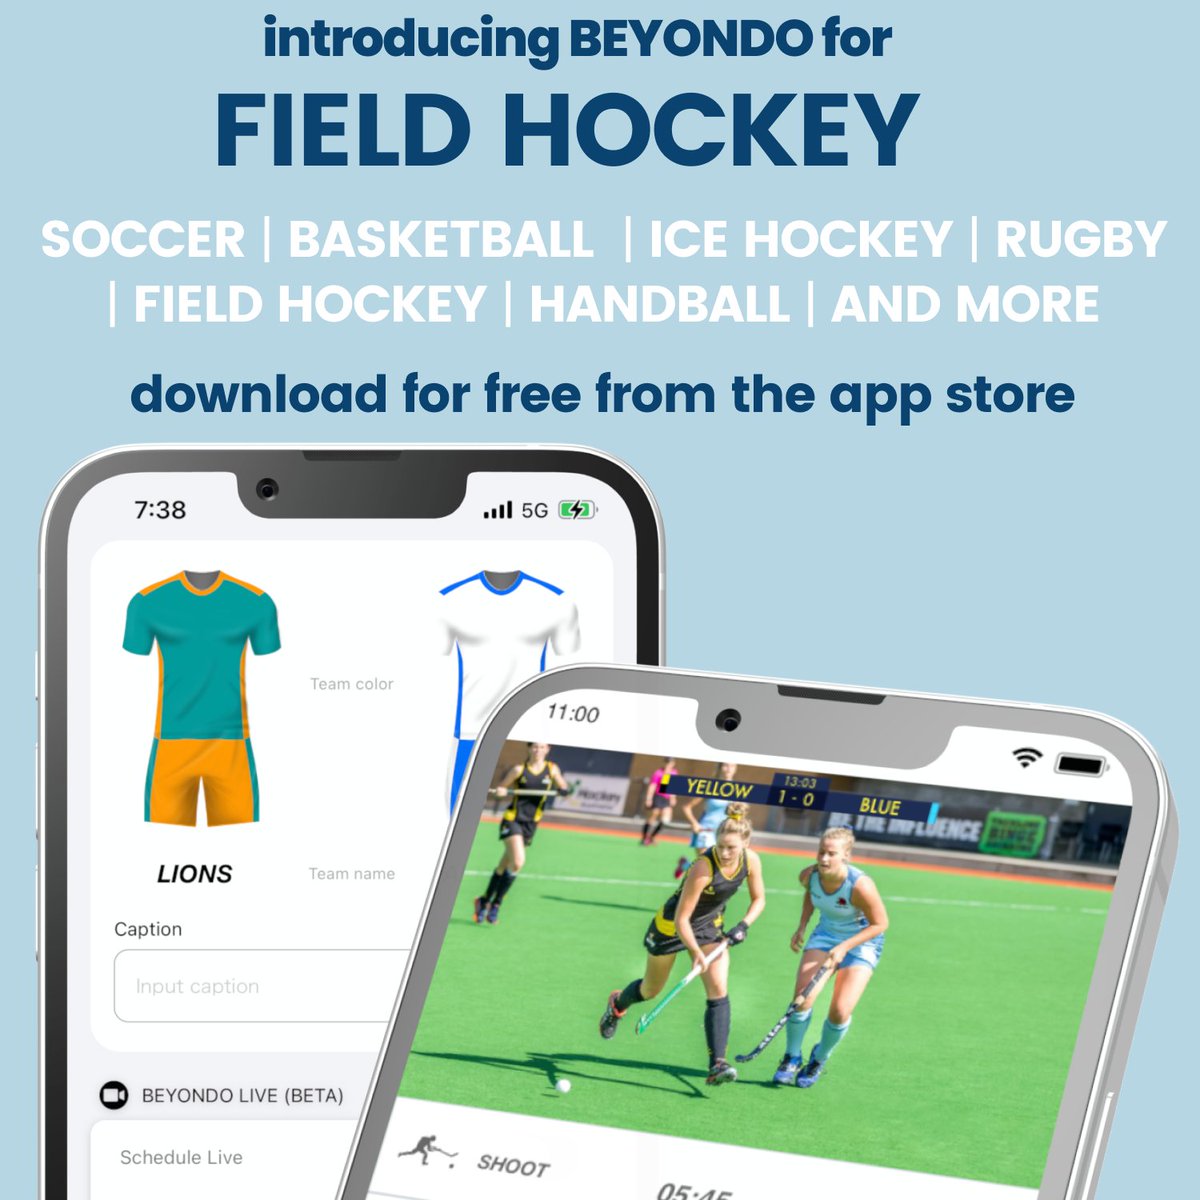 Try BEYONDO for Field Hockey now to Film, Live Stream, create and share Highlights with your team, friends & fans! Available for FREE in the App Store!
#fieldhockey #hockey #hockeylife #fieldhockeylife #fieldhockeyislife #fieldhockeyplayer #hockeyfamily #fieldhockeygirls #sports